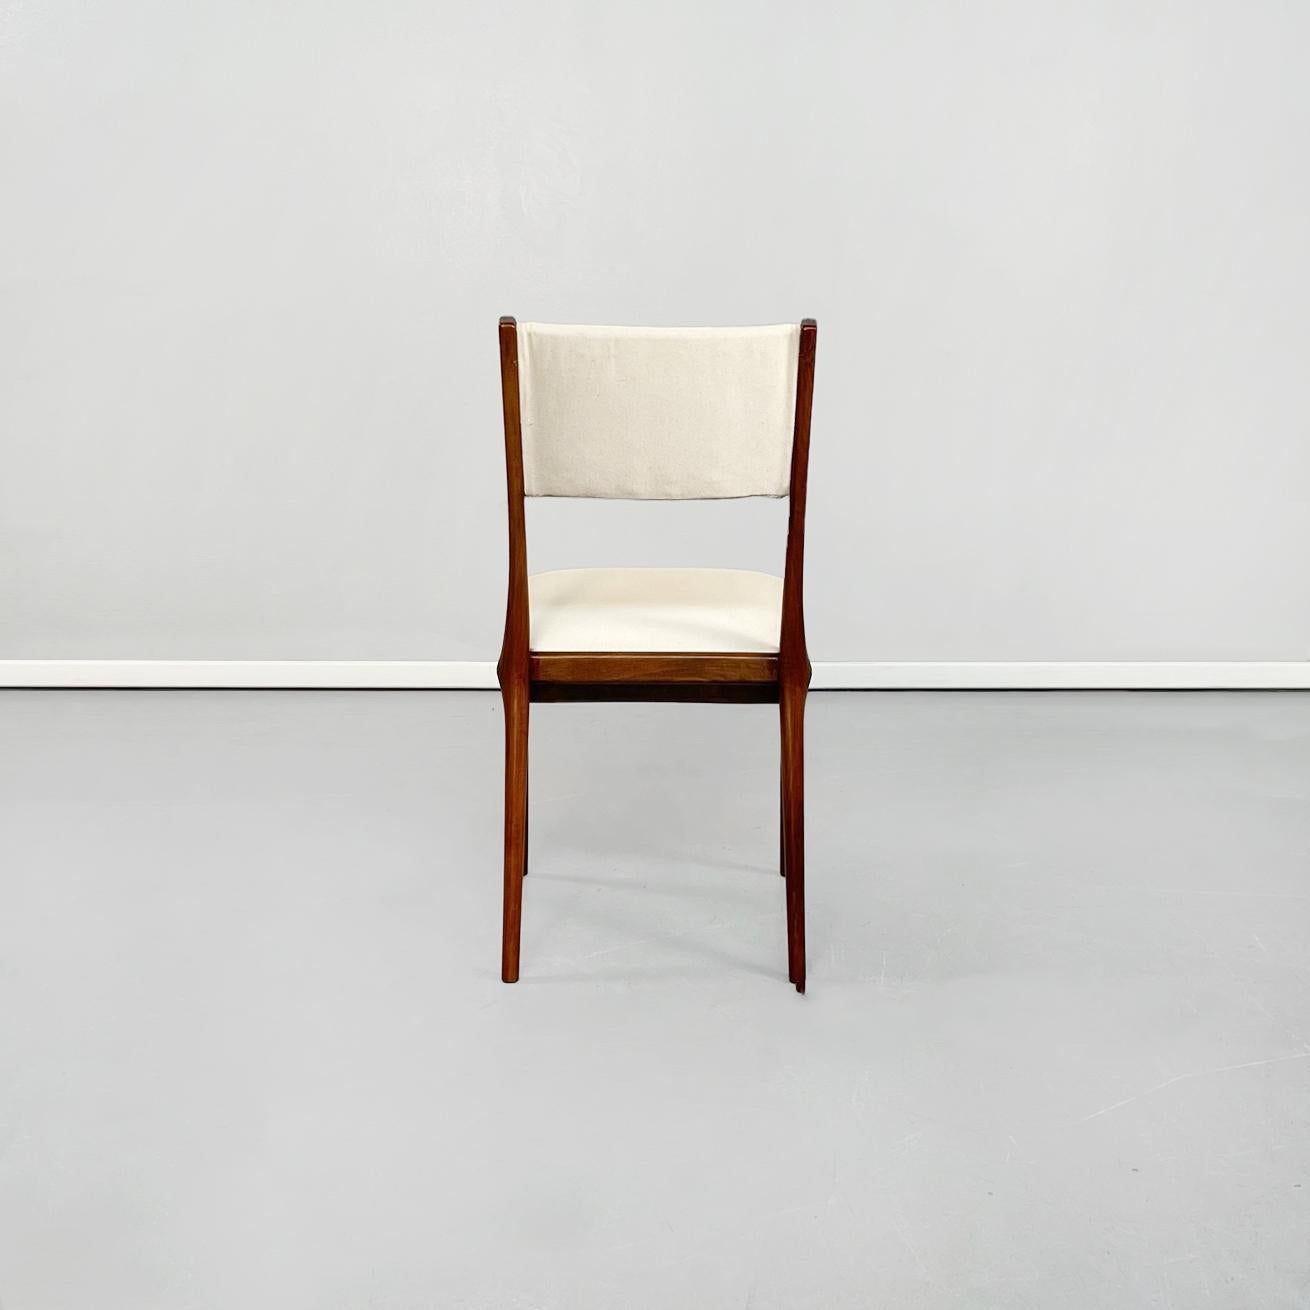 Italinan Mid-Century Modern White Fabric N Wood Chairs by De Carli Cassina, 1958 For Sale 1